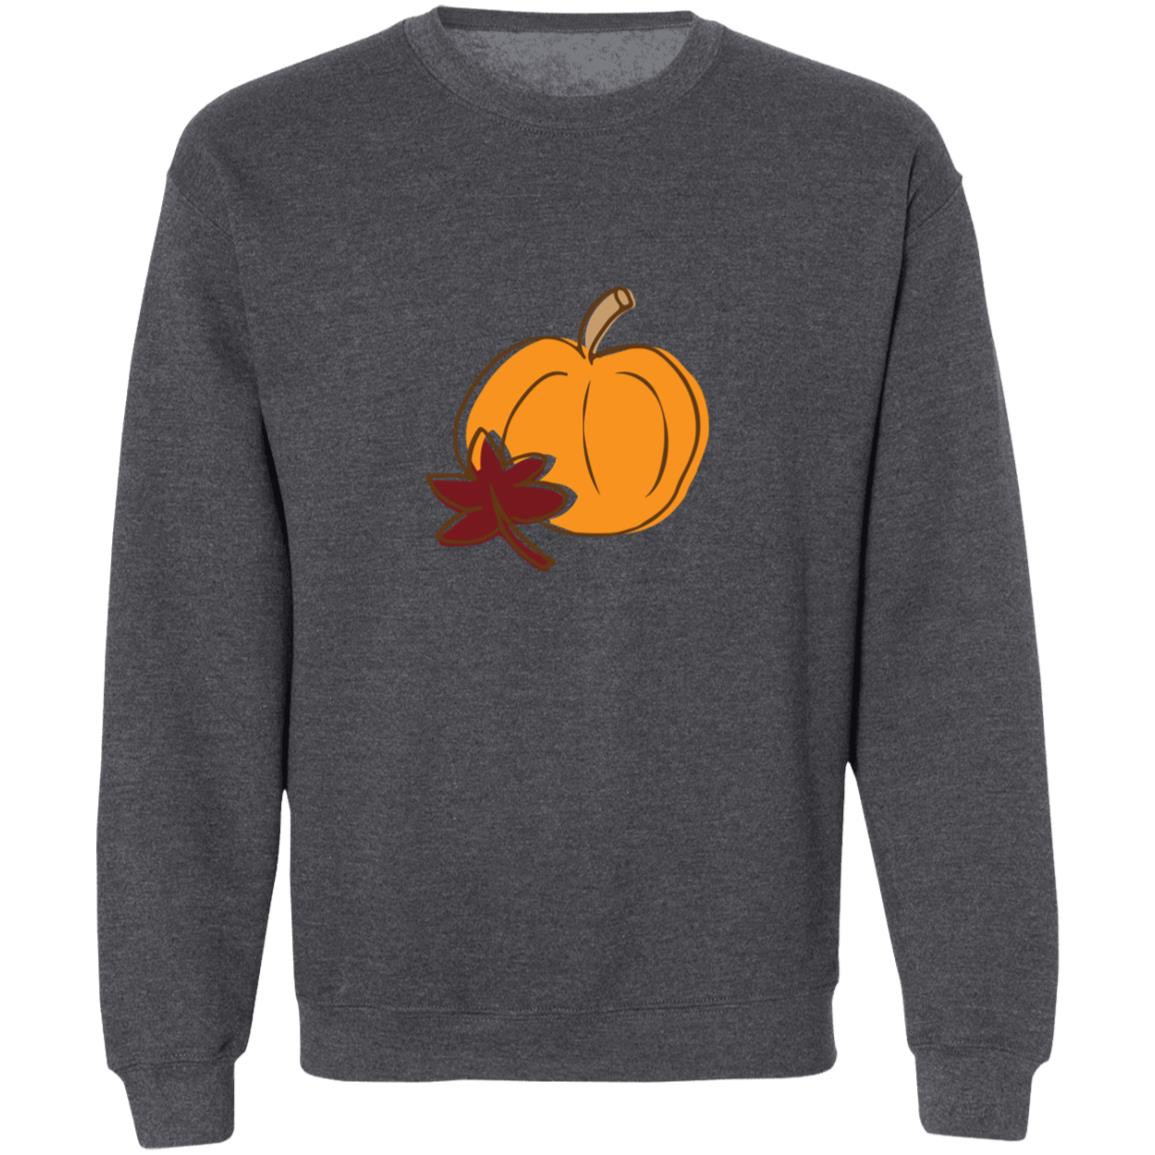 Get trendy with Pumpkin and Leaf  Crewneck Sweatshirt 8 oz (Closeout) -  available at Good Gift Company. Grab yours for $27 today!